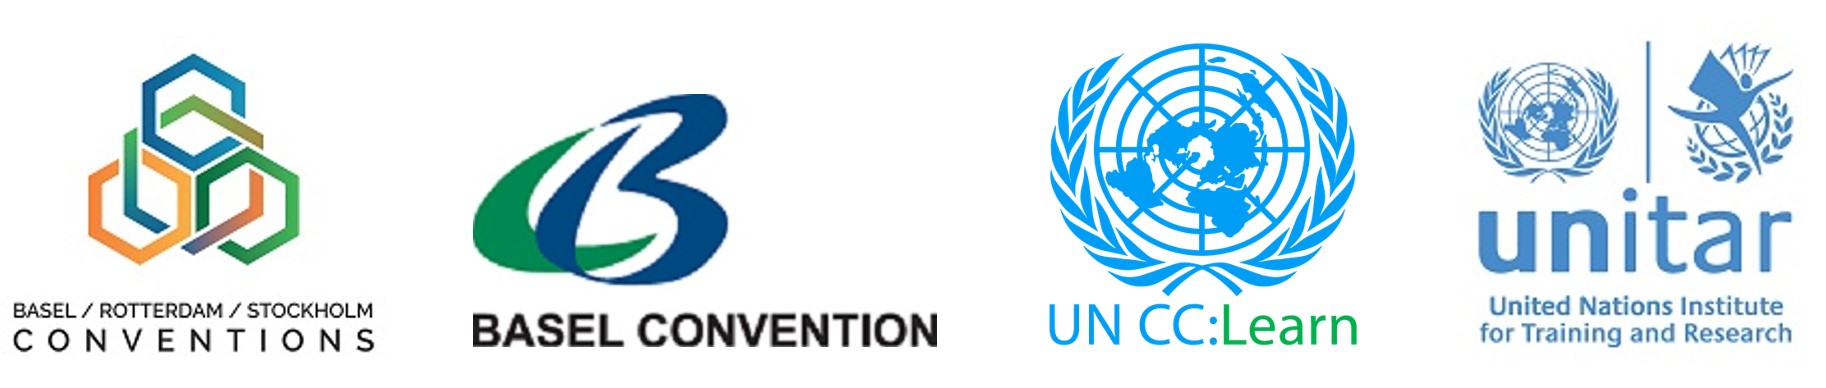 Logos of BRS, Basel Convention, UNCCLEARN and UNITAR